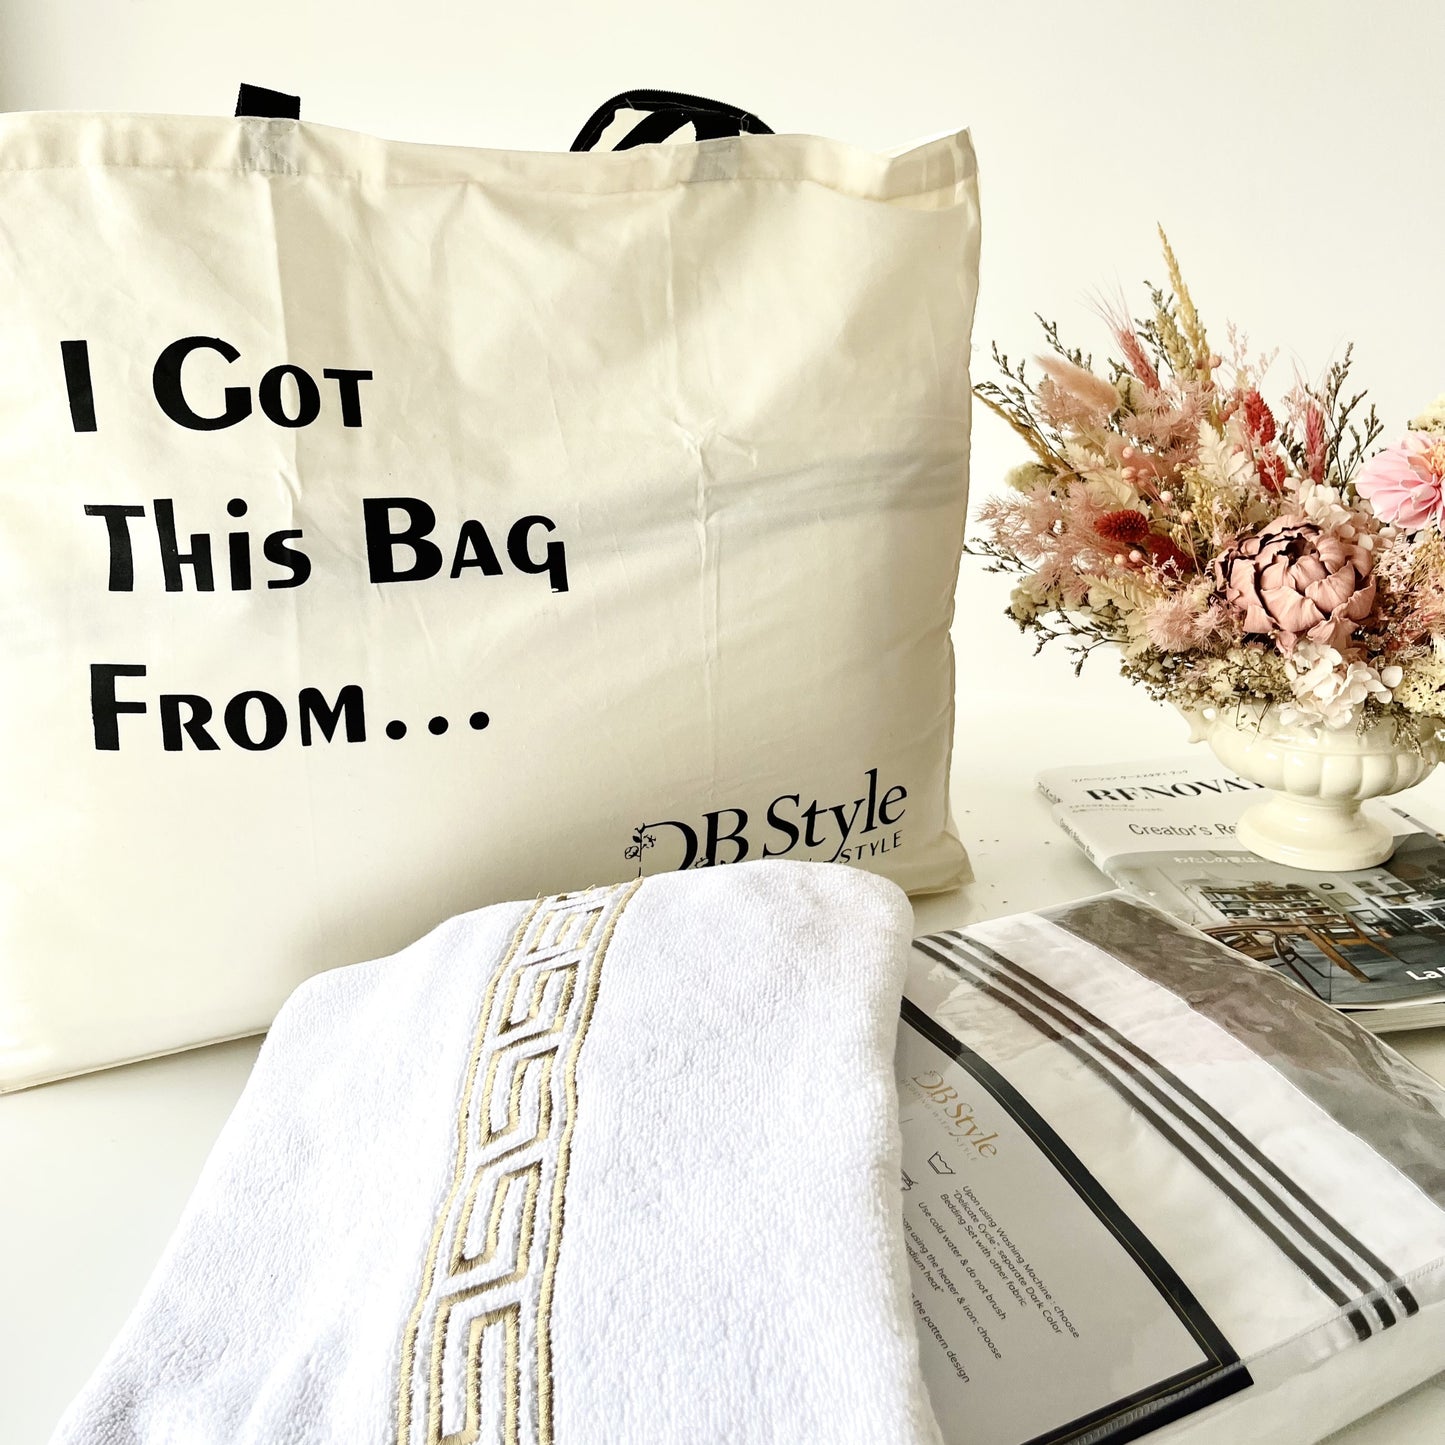 DB Style Tote Bag - Grocery Bag